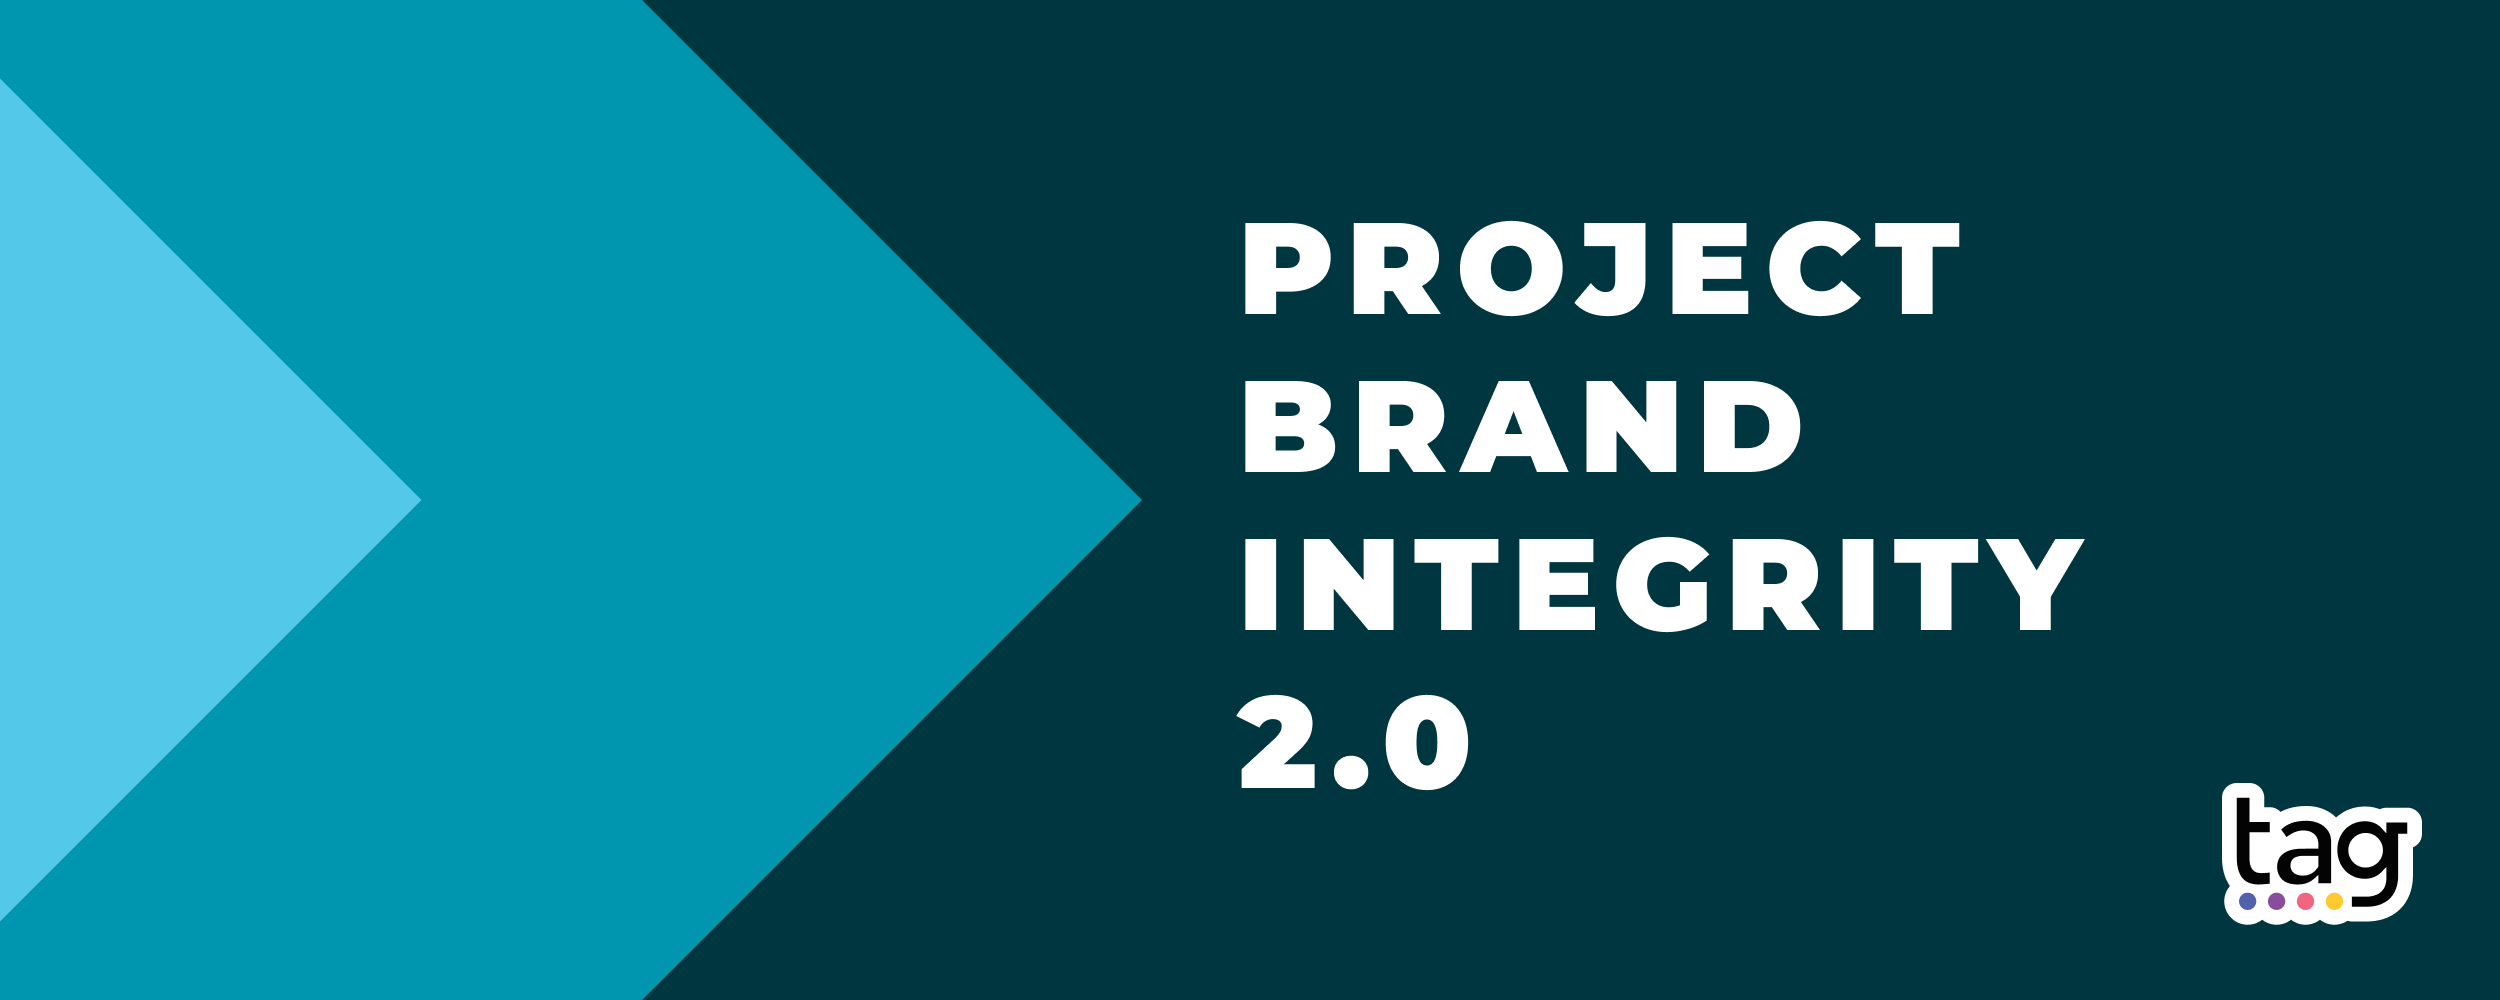 Project Brand Integrity 2.0